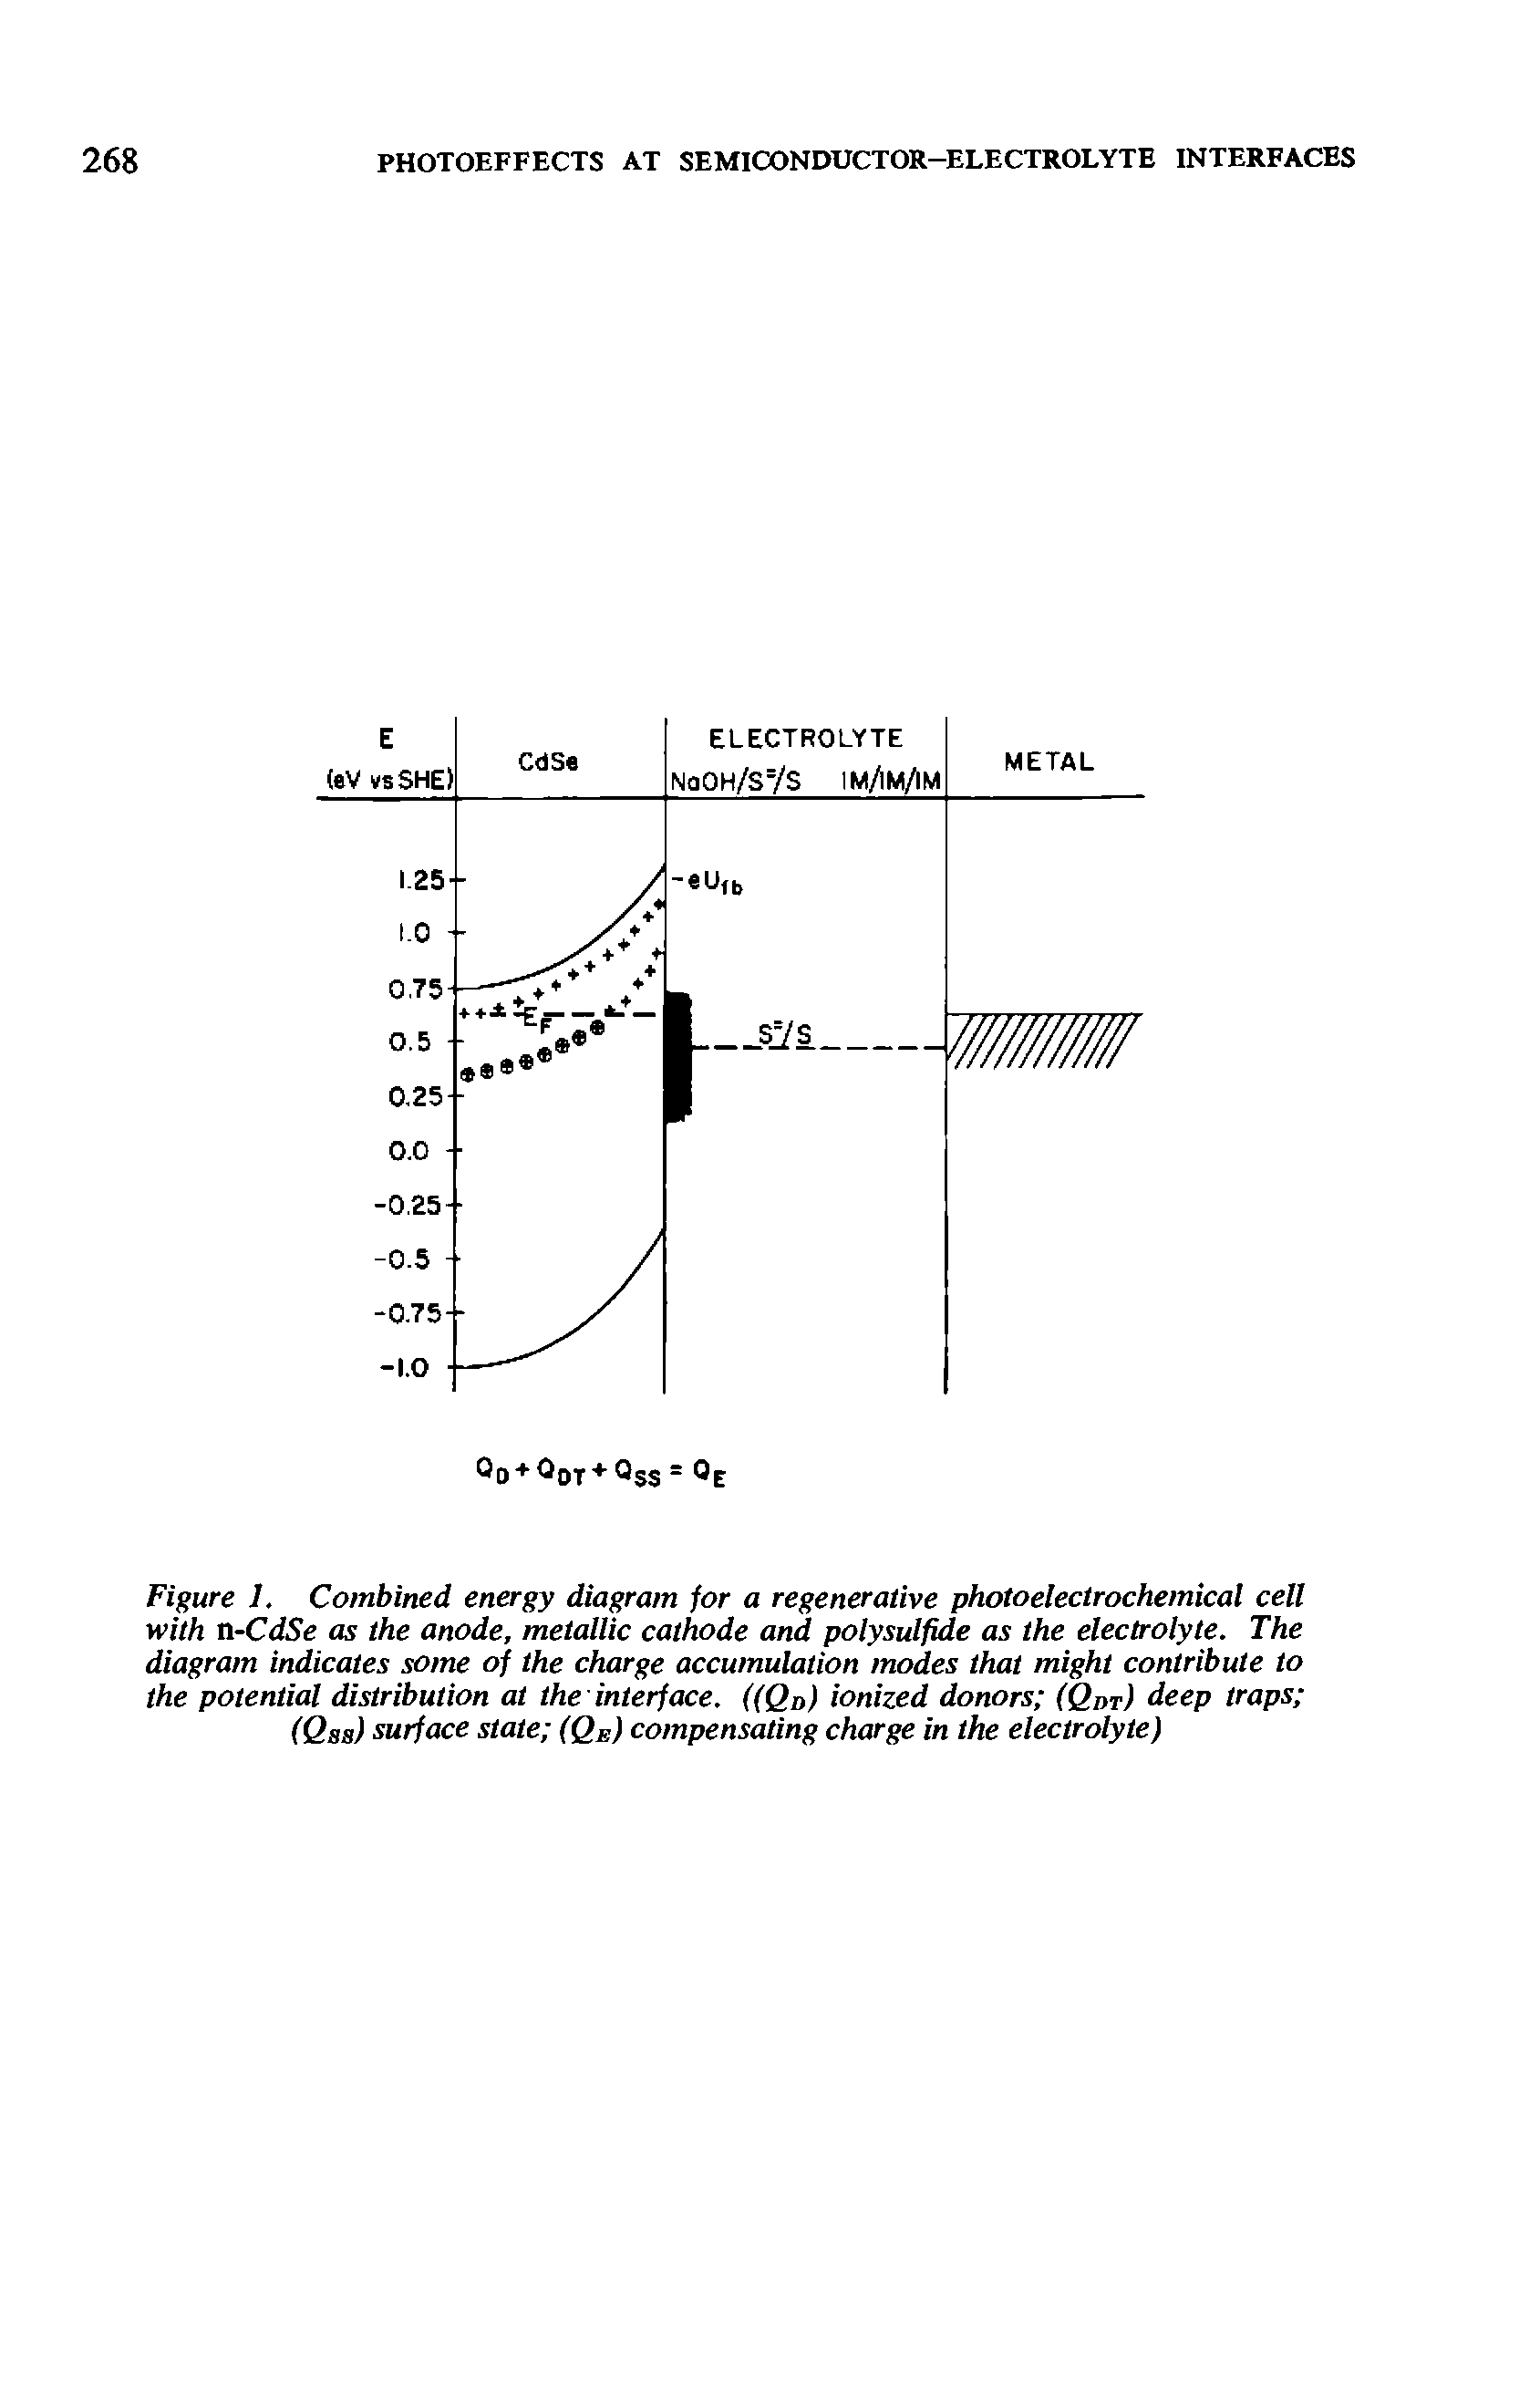 Figure 1. Combined energy diagram for a regenerative photoelectrochemical cell with n-CdSe as the anode, metallic cathode and polysulfide as the electrolyte. The diagram indicates some of the charge accumulation modes that might contribute to the potential distribution at the interface. ((Qn) ionized donors (Qdt) deep traps ...